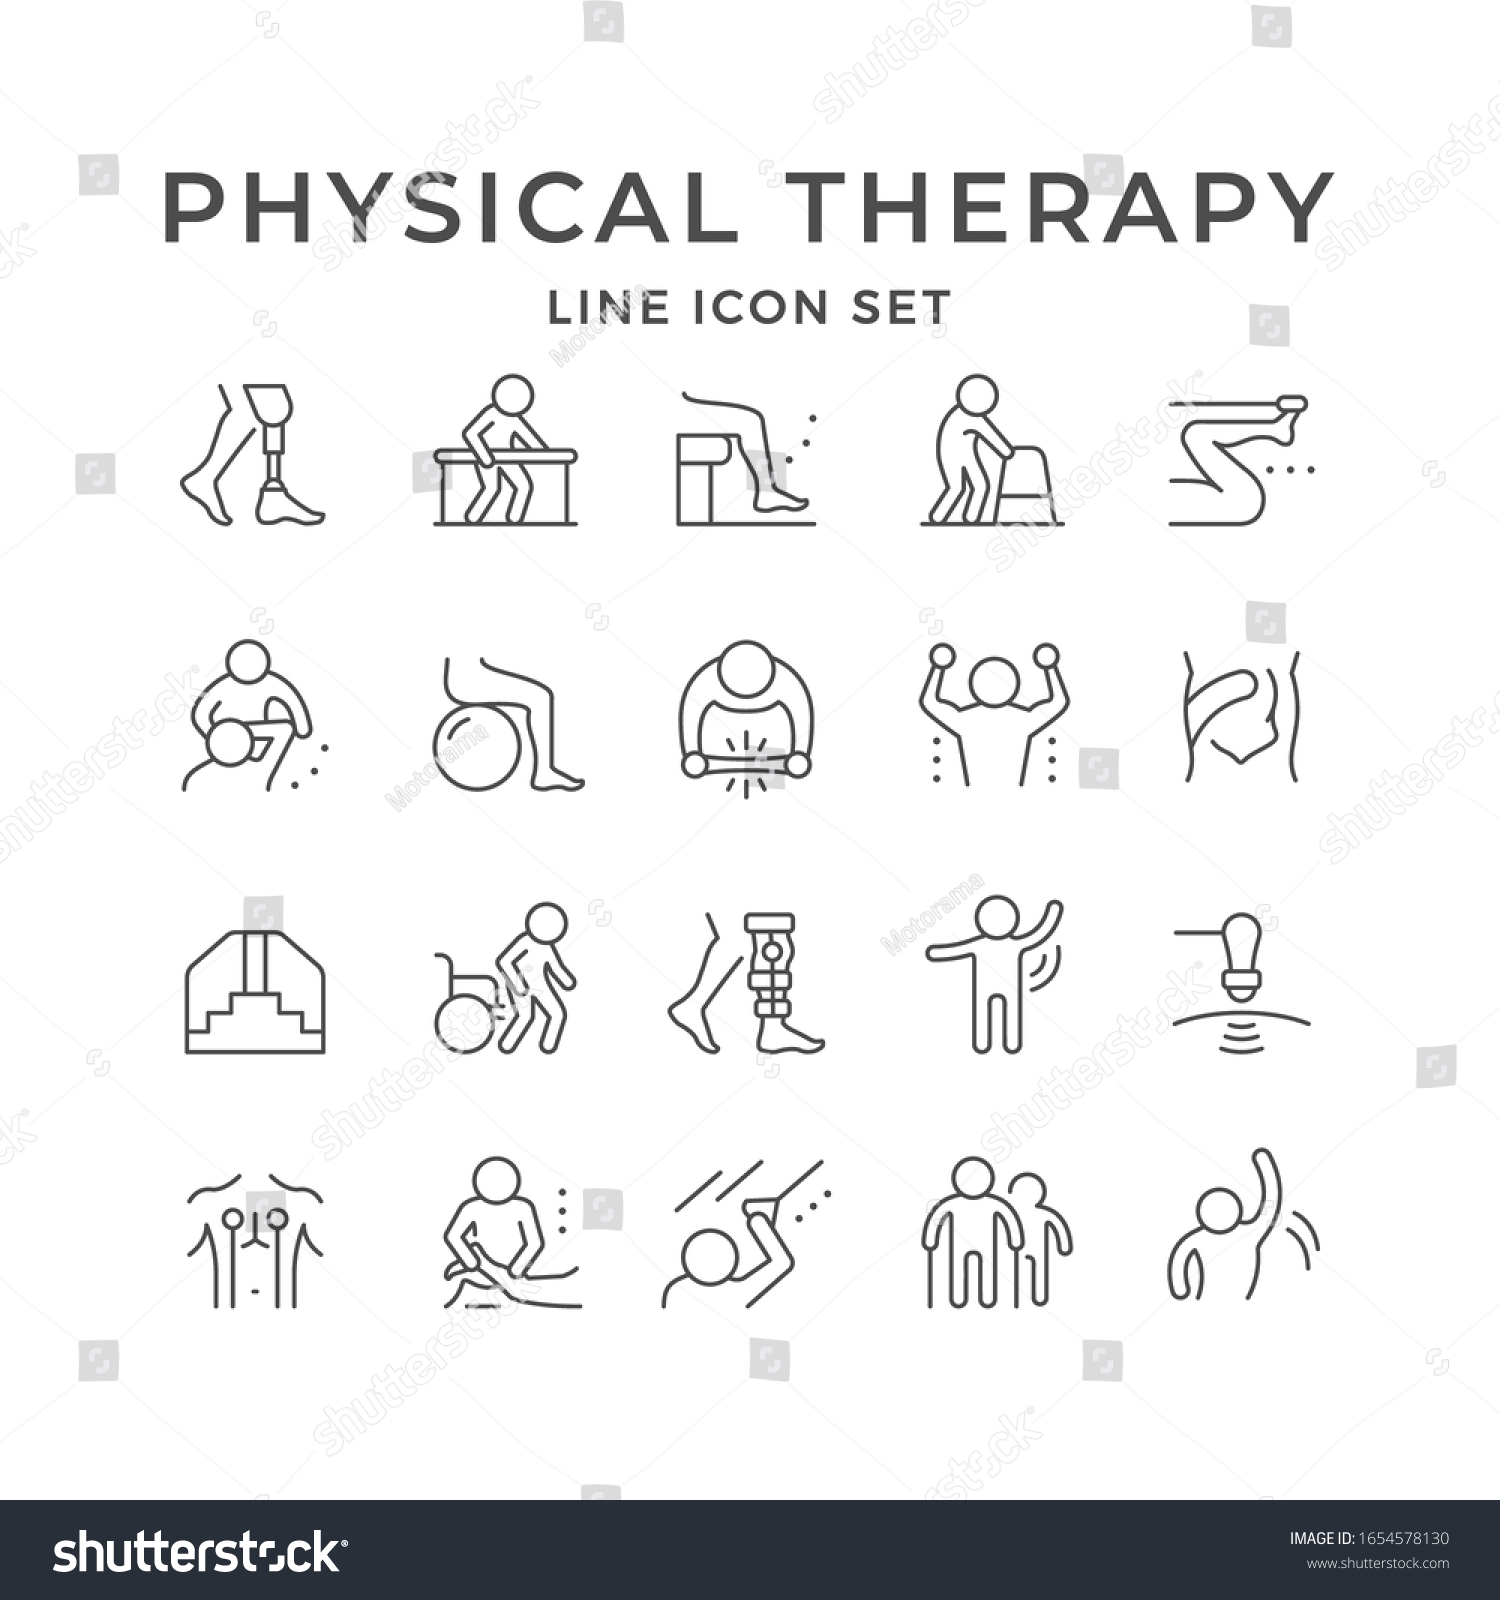 SVG of Set line icons of physical therapy svg